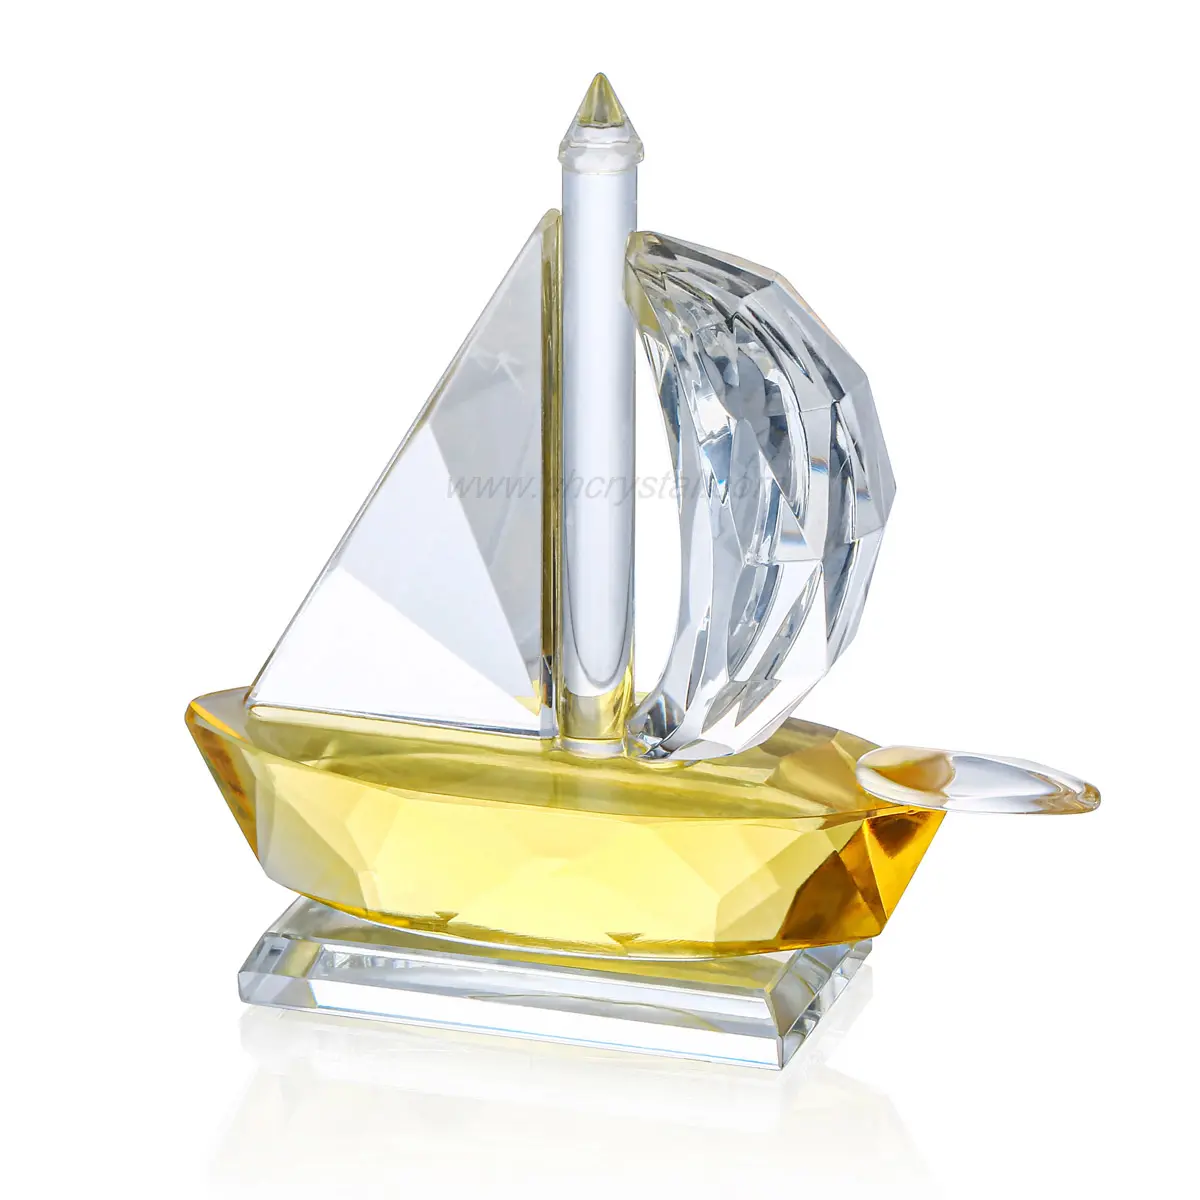 Different designs customized yellow crystal sailboat figurines for home and table decoration unique style